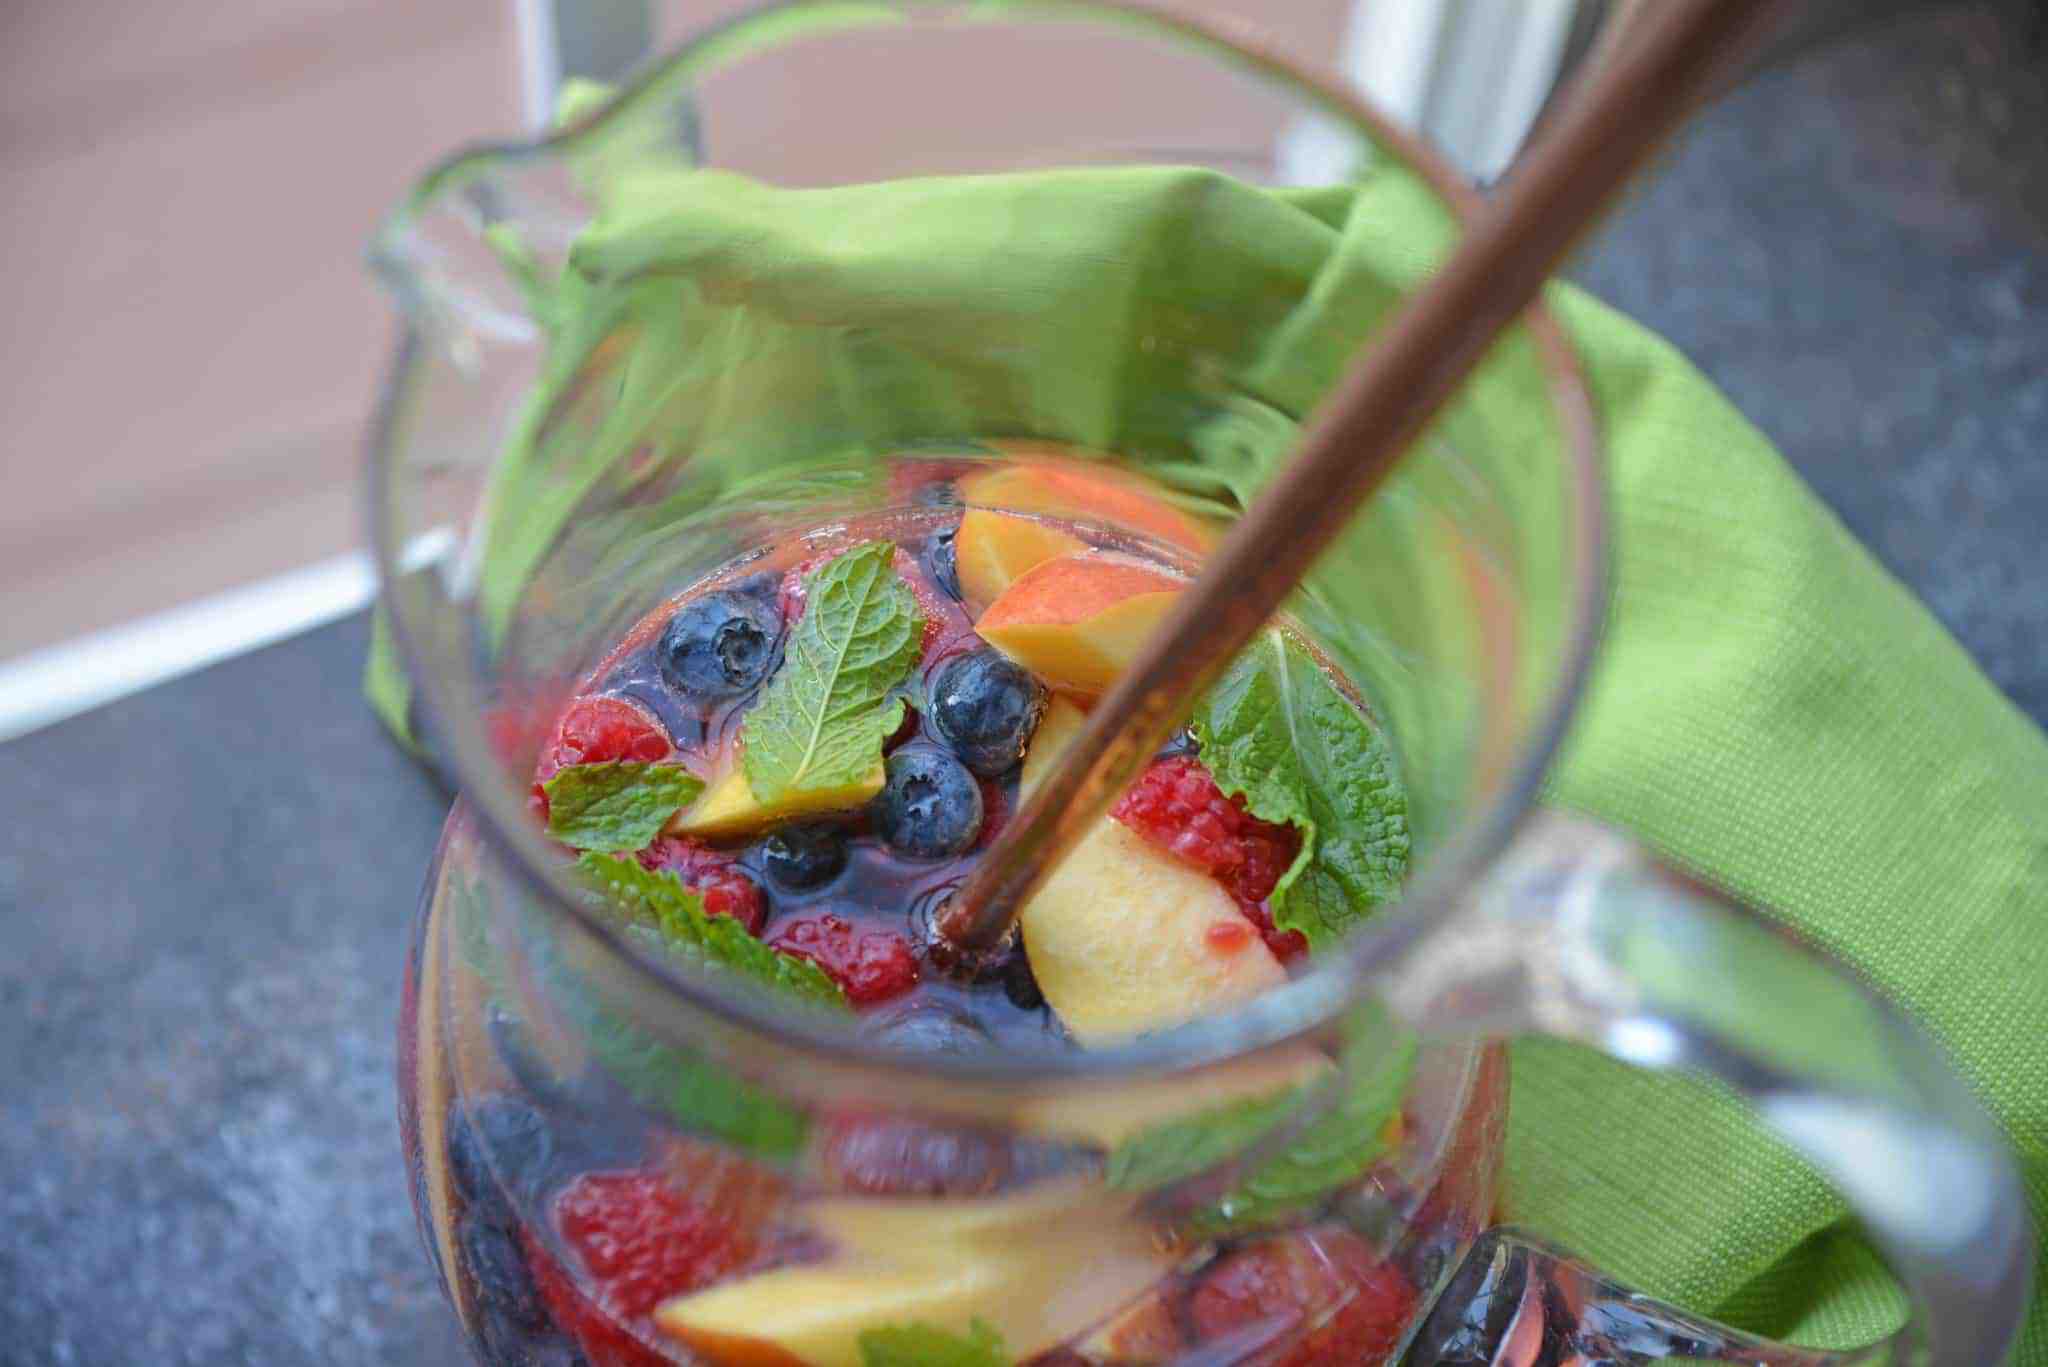 Sparkling Peach Sangria is the perfect summer cocktail recipe for your next party! Make a non-alcoholic and alcoholic version with fresh summer fruits.